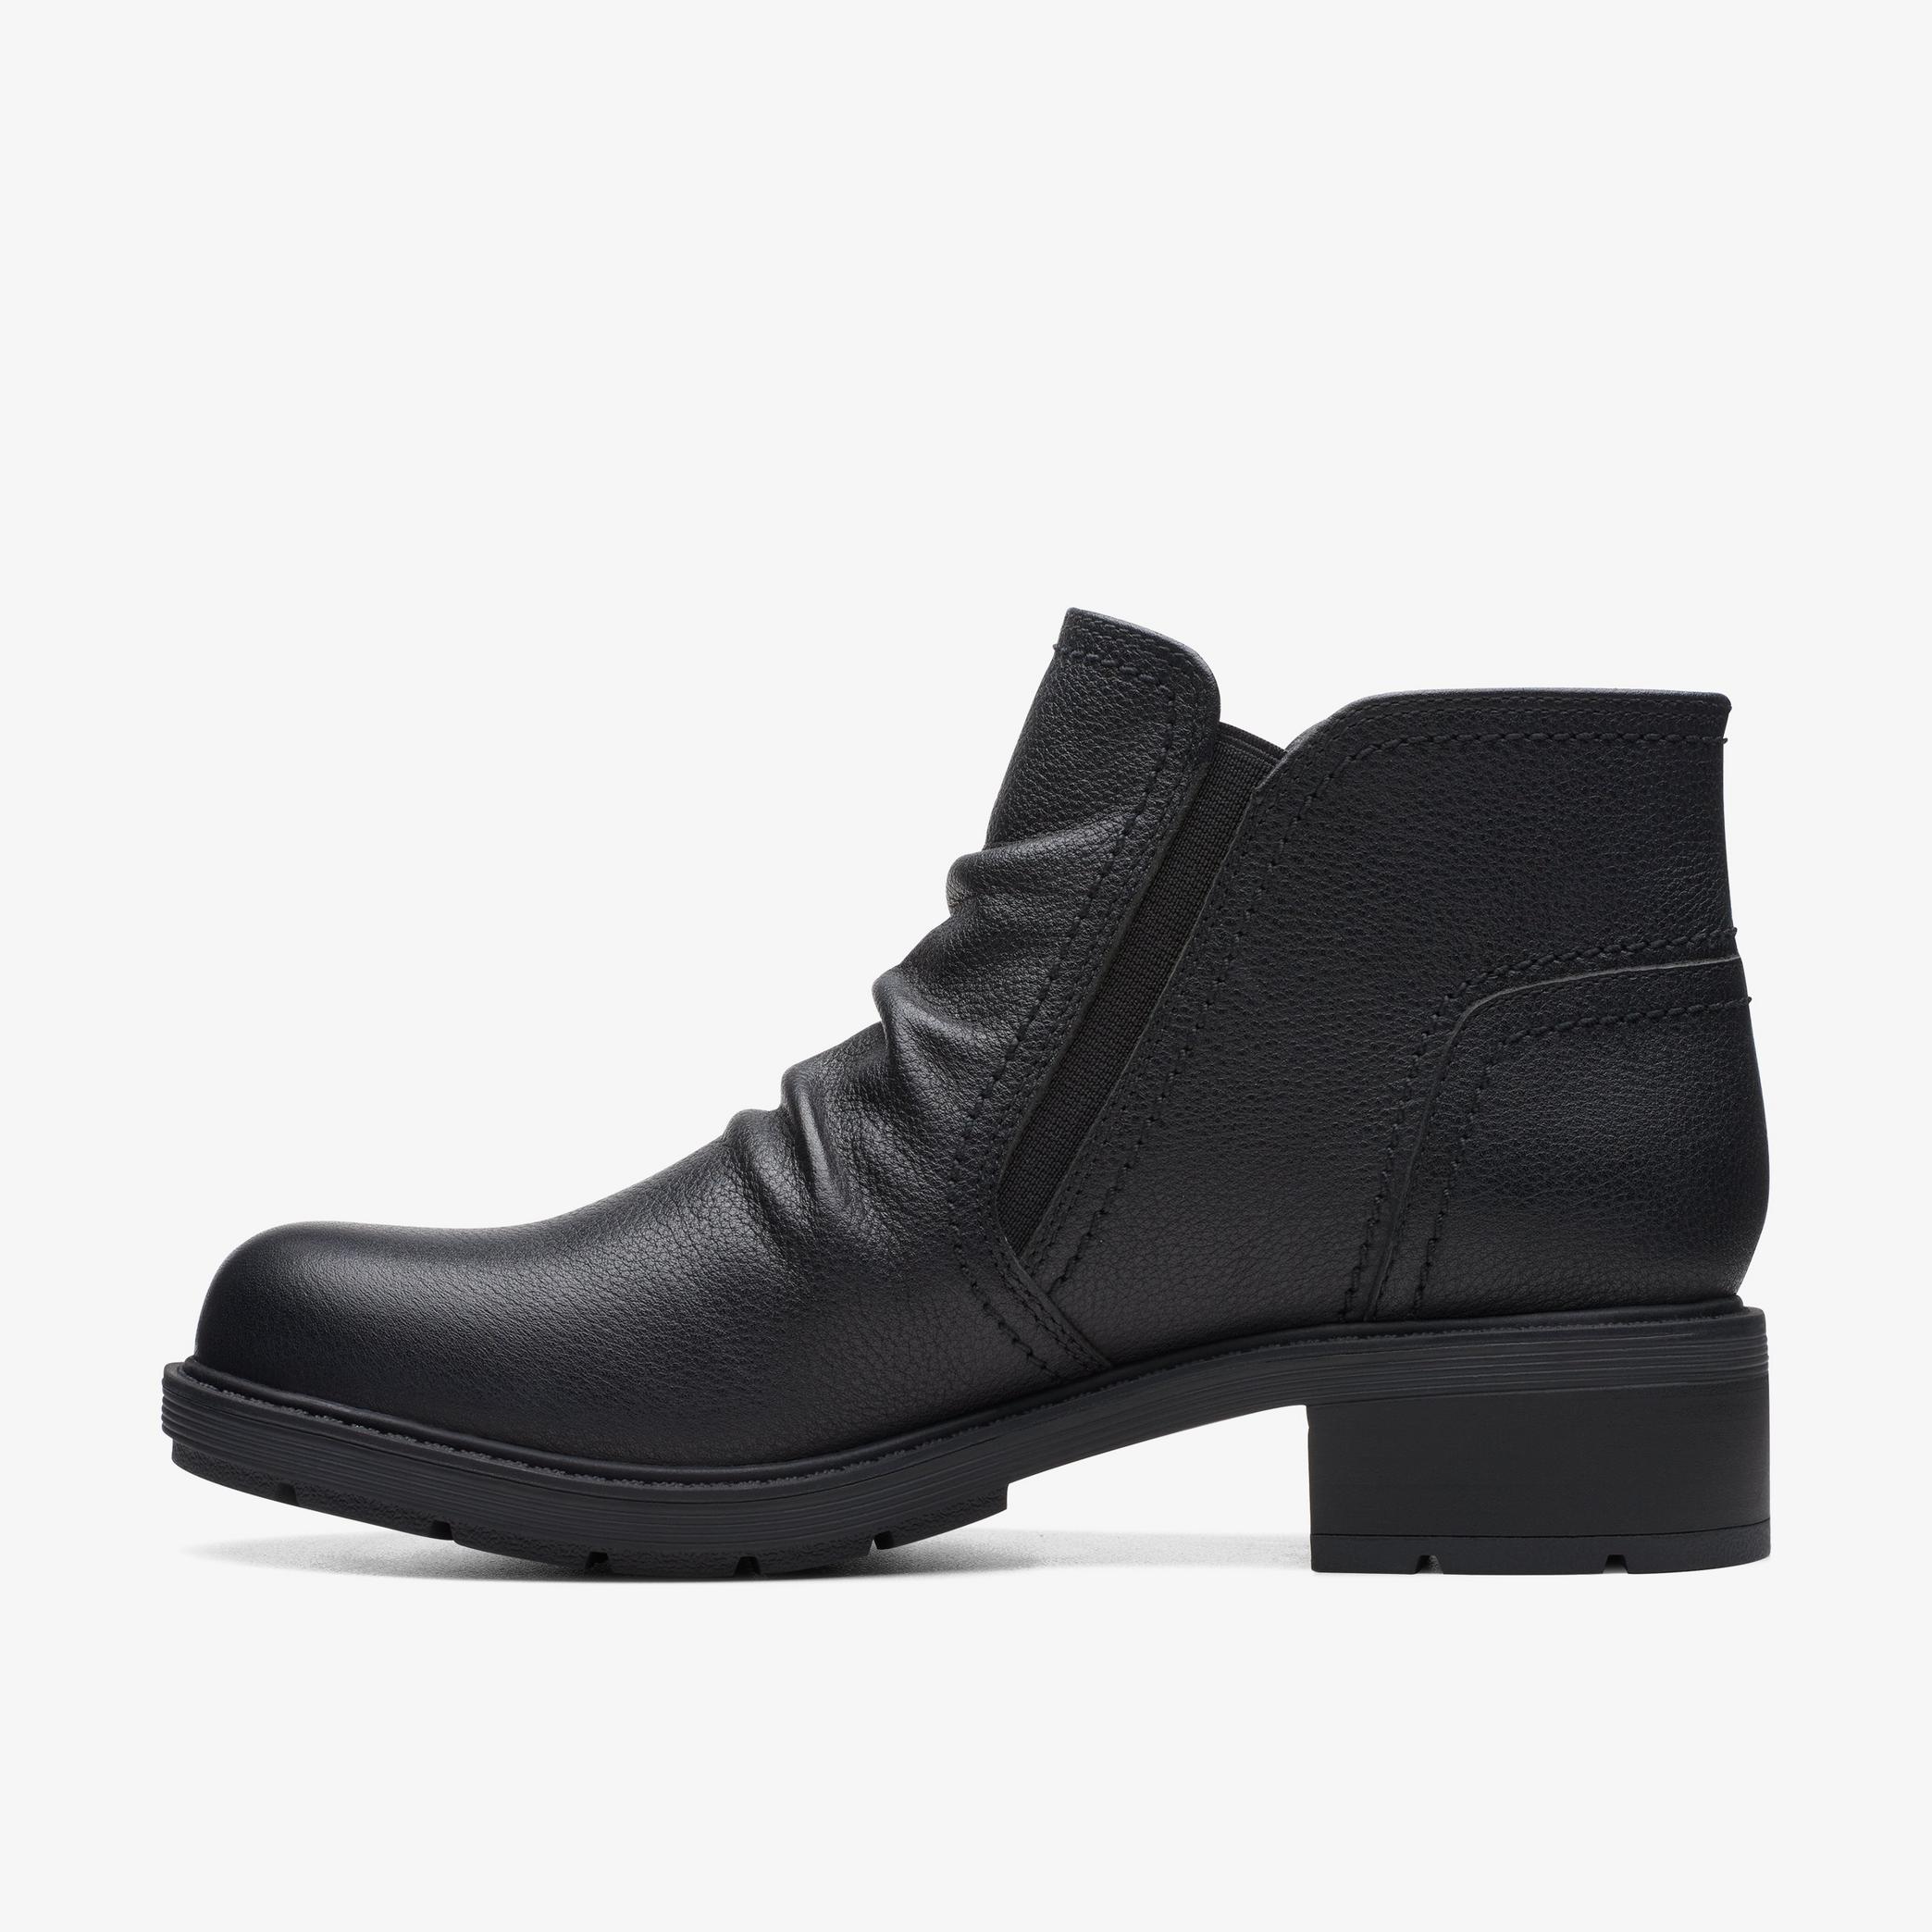 Hearth Dove Black Leather Ankle Boots, view 2 of 6